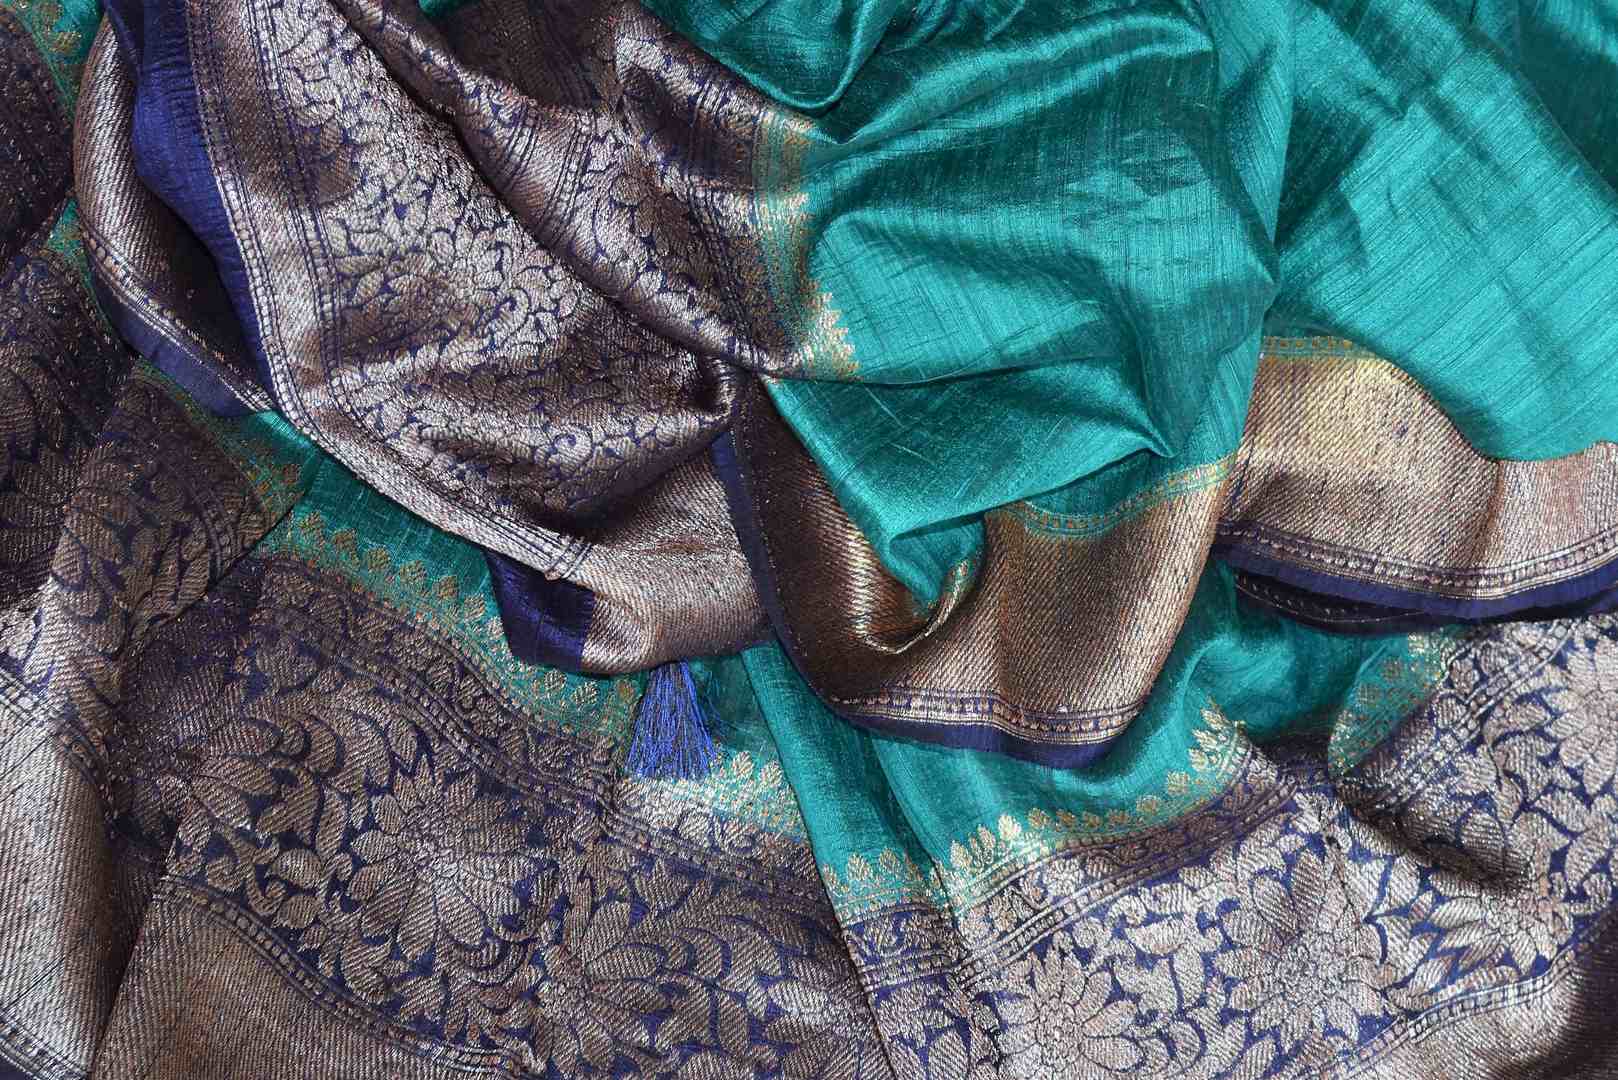 Accentuate your beauty with this exclusively designed mint green matka banarsi silk saree. It comes with a gorgeous zari handwoven border and a contrasting royal blue zari blouse. Complement the sari with pearl jewelry. Shop designer banarsi silk sari, organza saree, linen sari online or visit Pure Elegance store, USA.-details